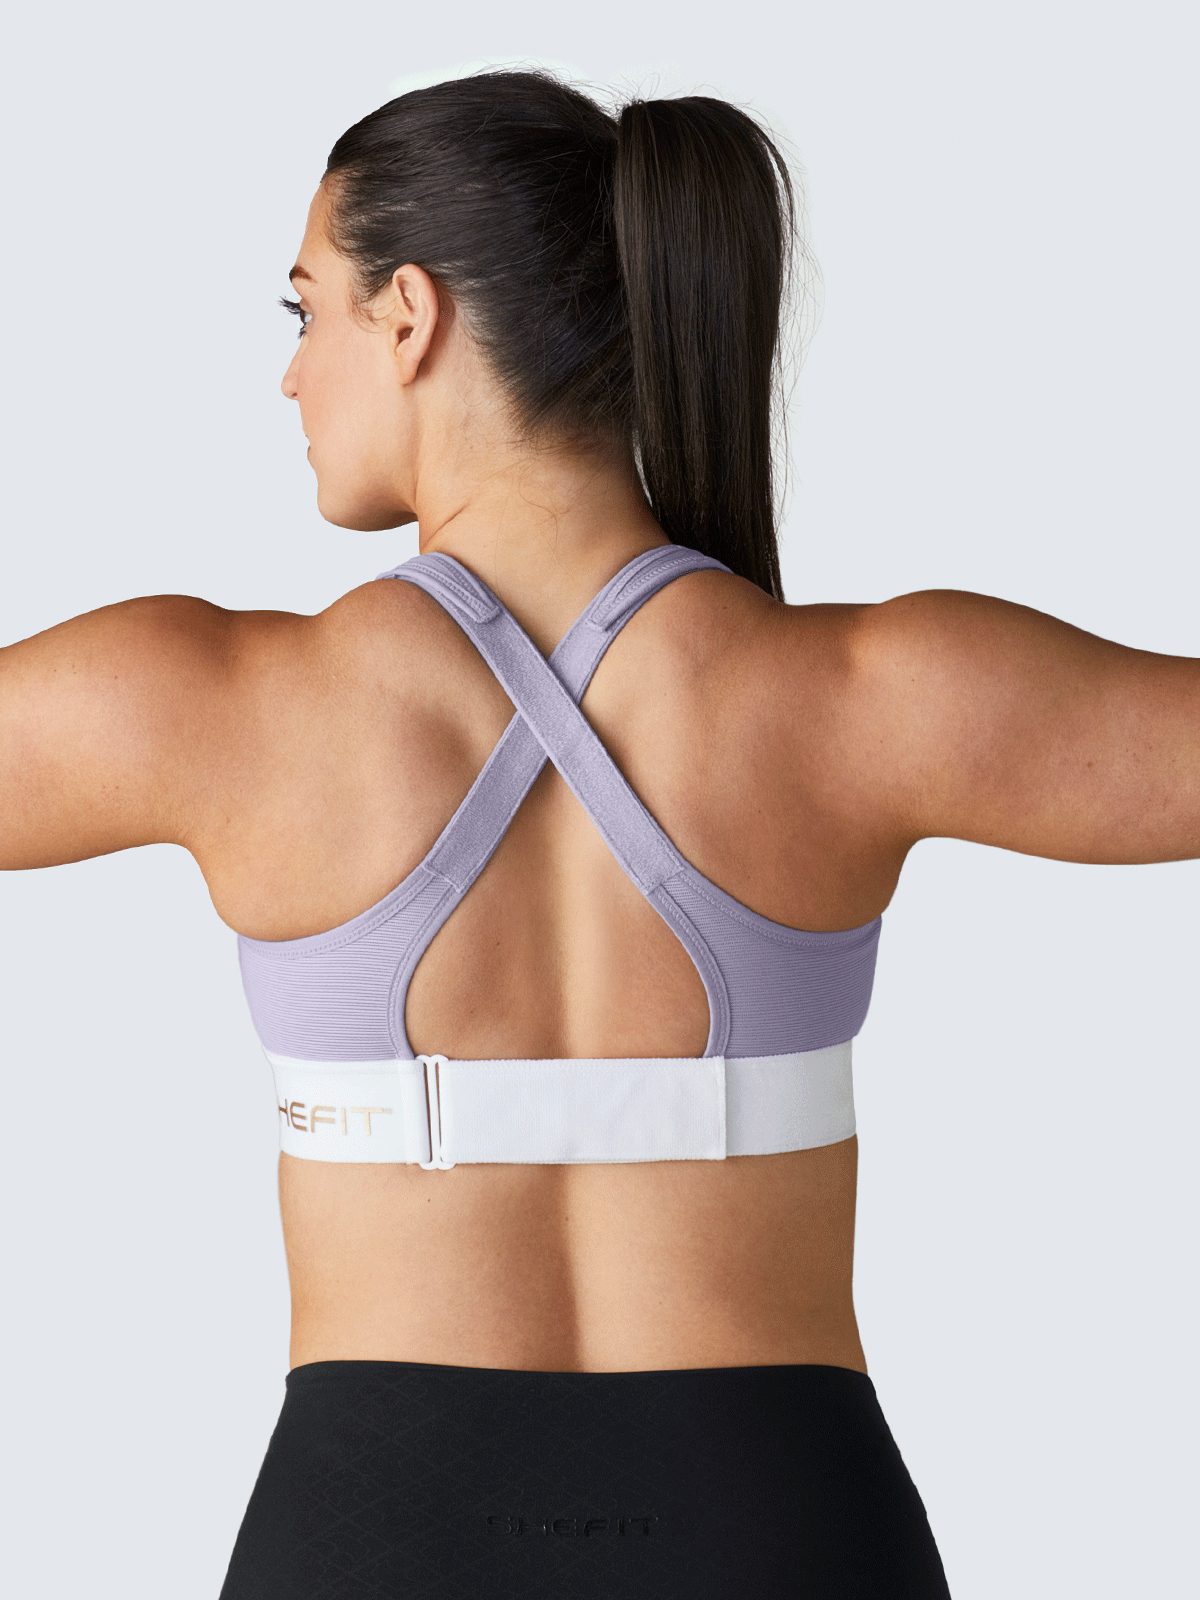 SHEFIT Ultimate Sports Bra White 1 LUXE High Impact Adjustable w PADS Size  XL - $45 New With Tags - From Nina